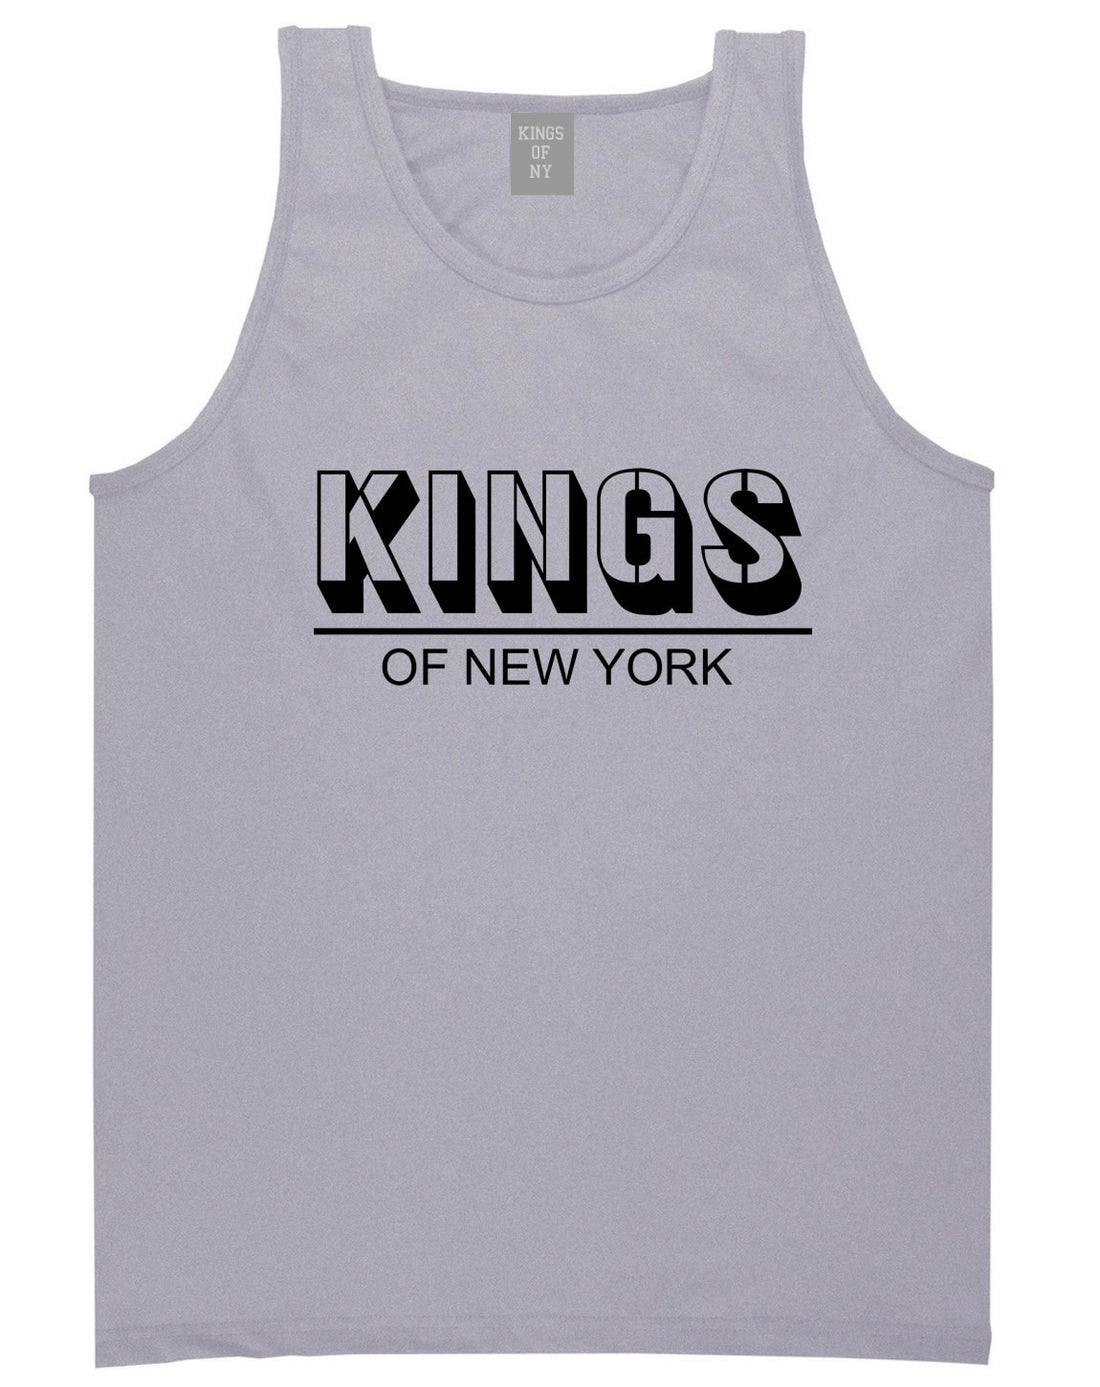 King Branded Block Letters Tank Top in Grey by Kings Of NY